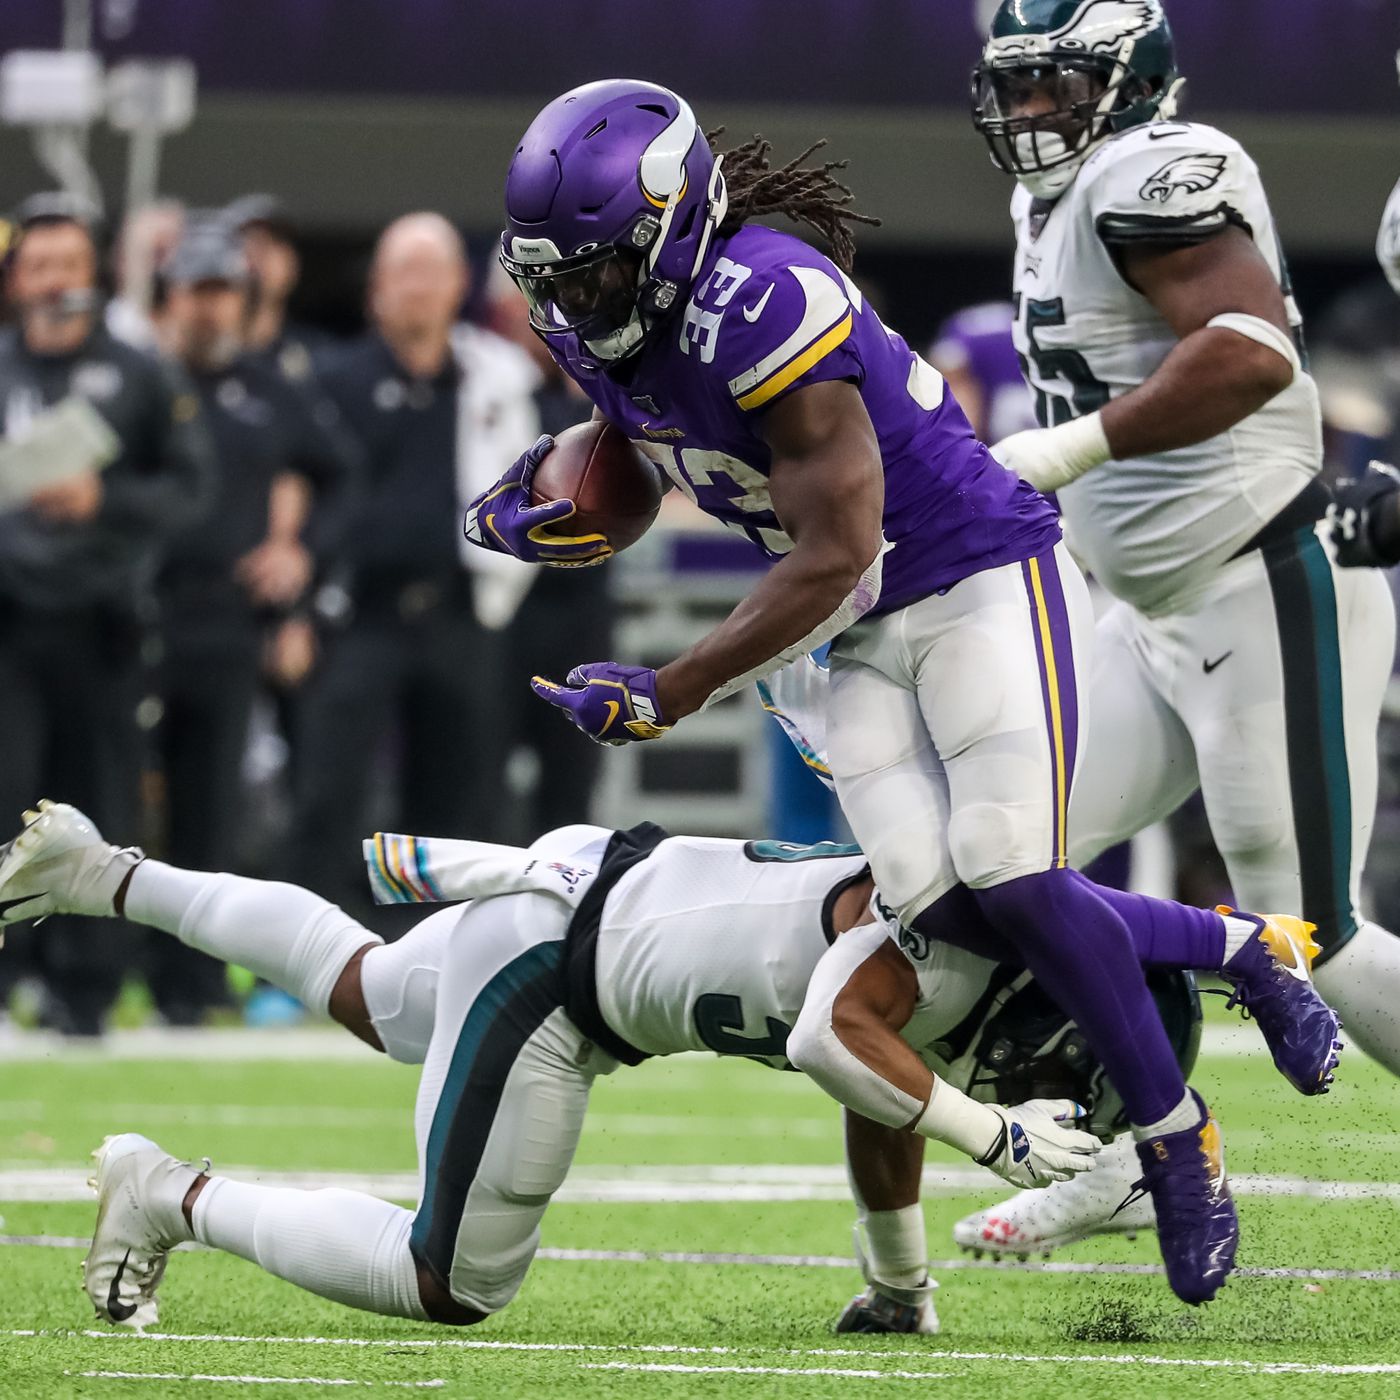 Vikings vs. Eagles live stream: How to watch NFL game online tonight